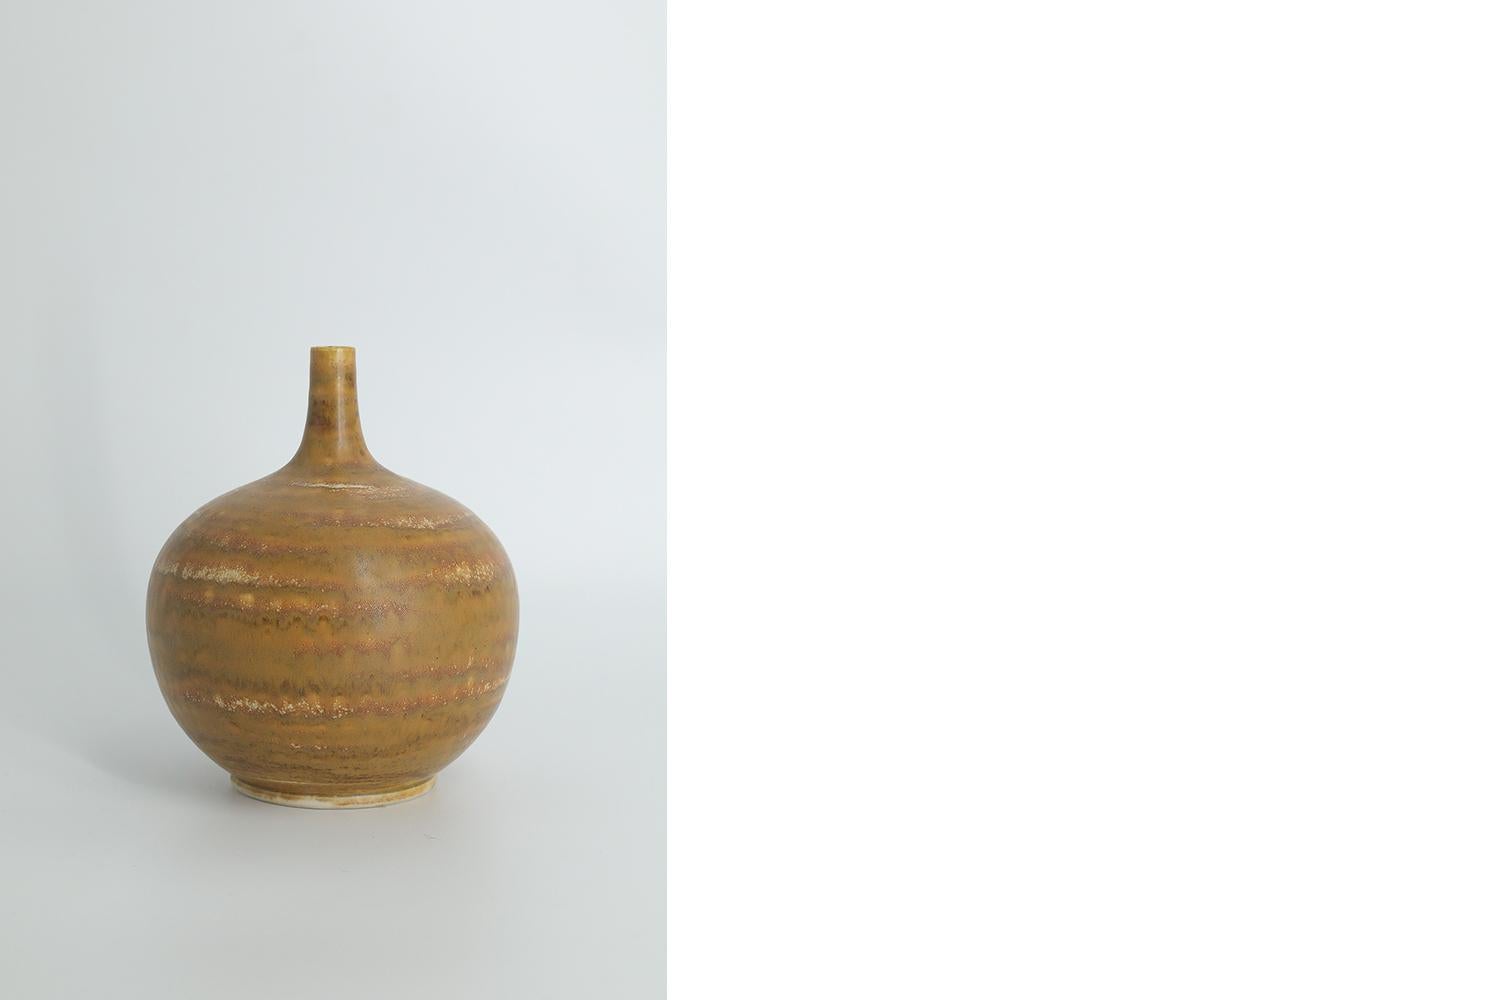 Scandinavian Modern Collectible Small Spherical Stoneware Vase by Gunnar Borg  In Excellent Condition For Sale In Warszawa, Mazowieckie